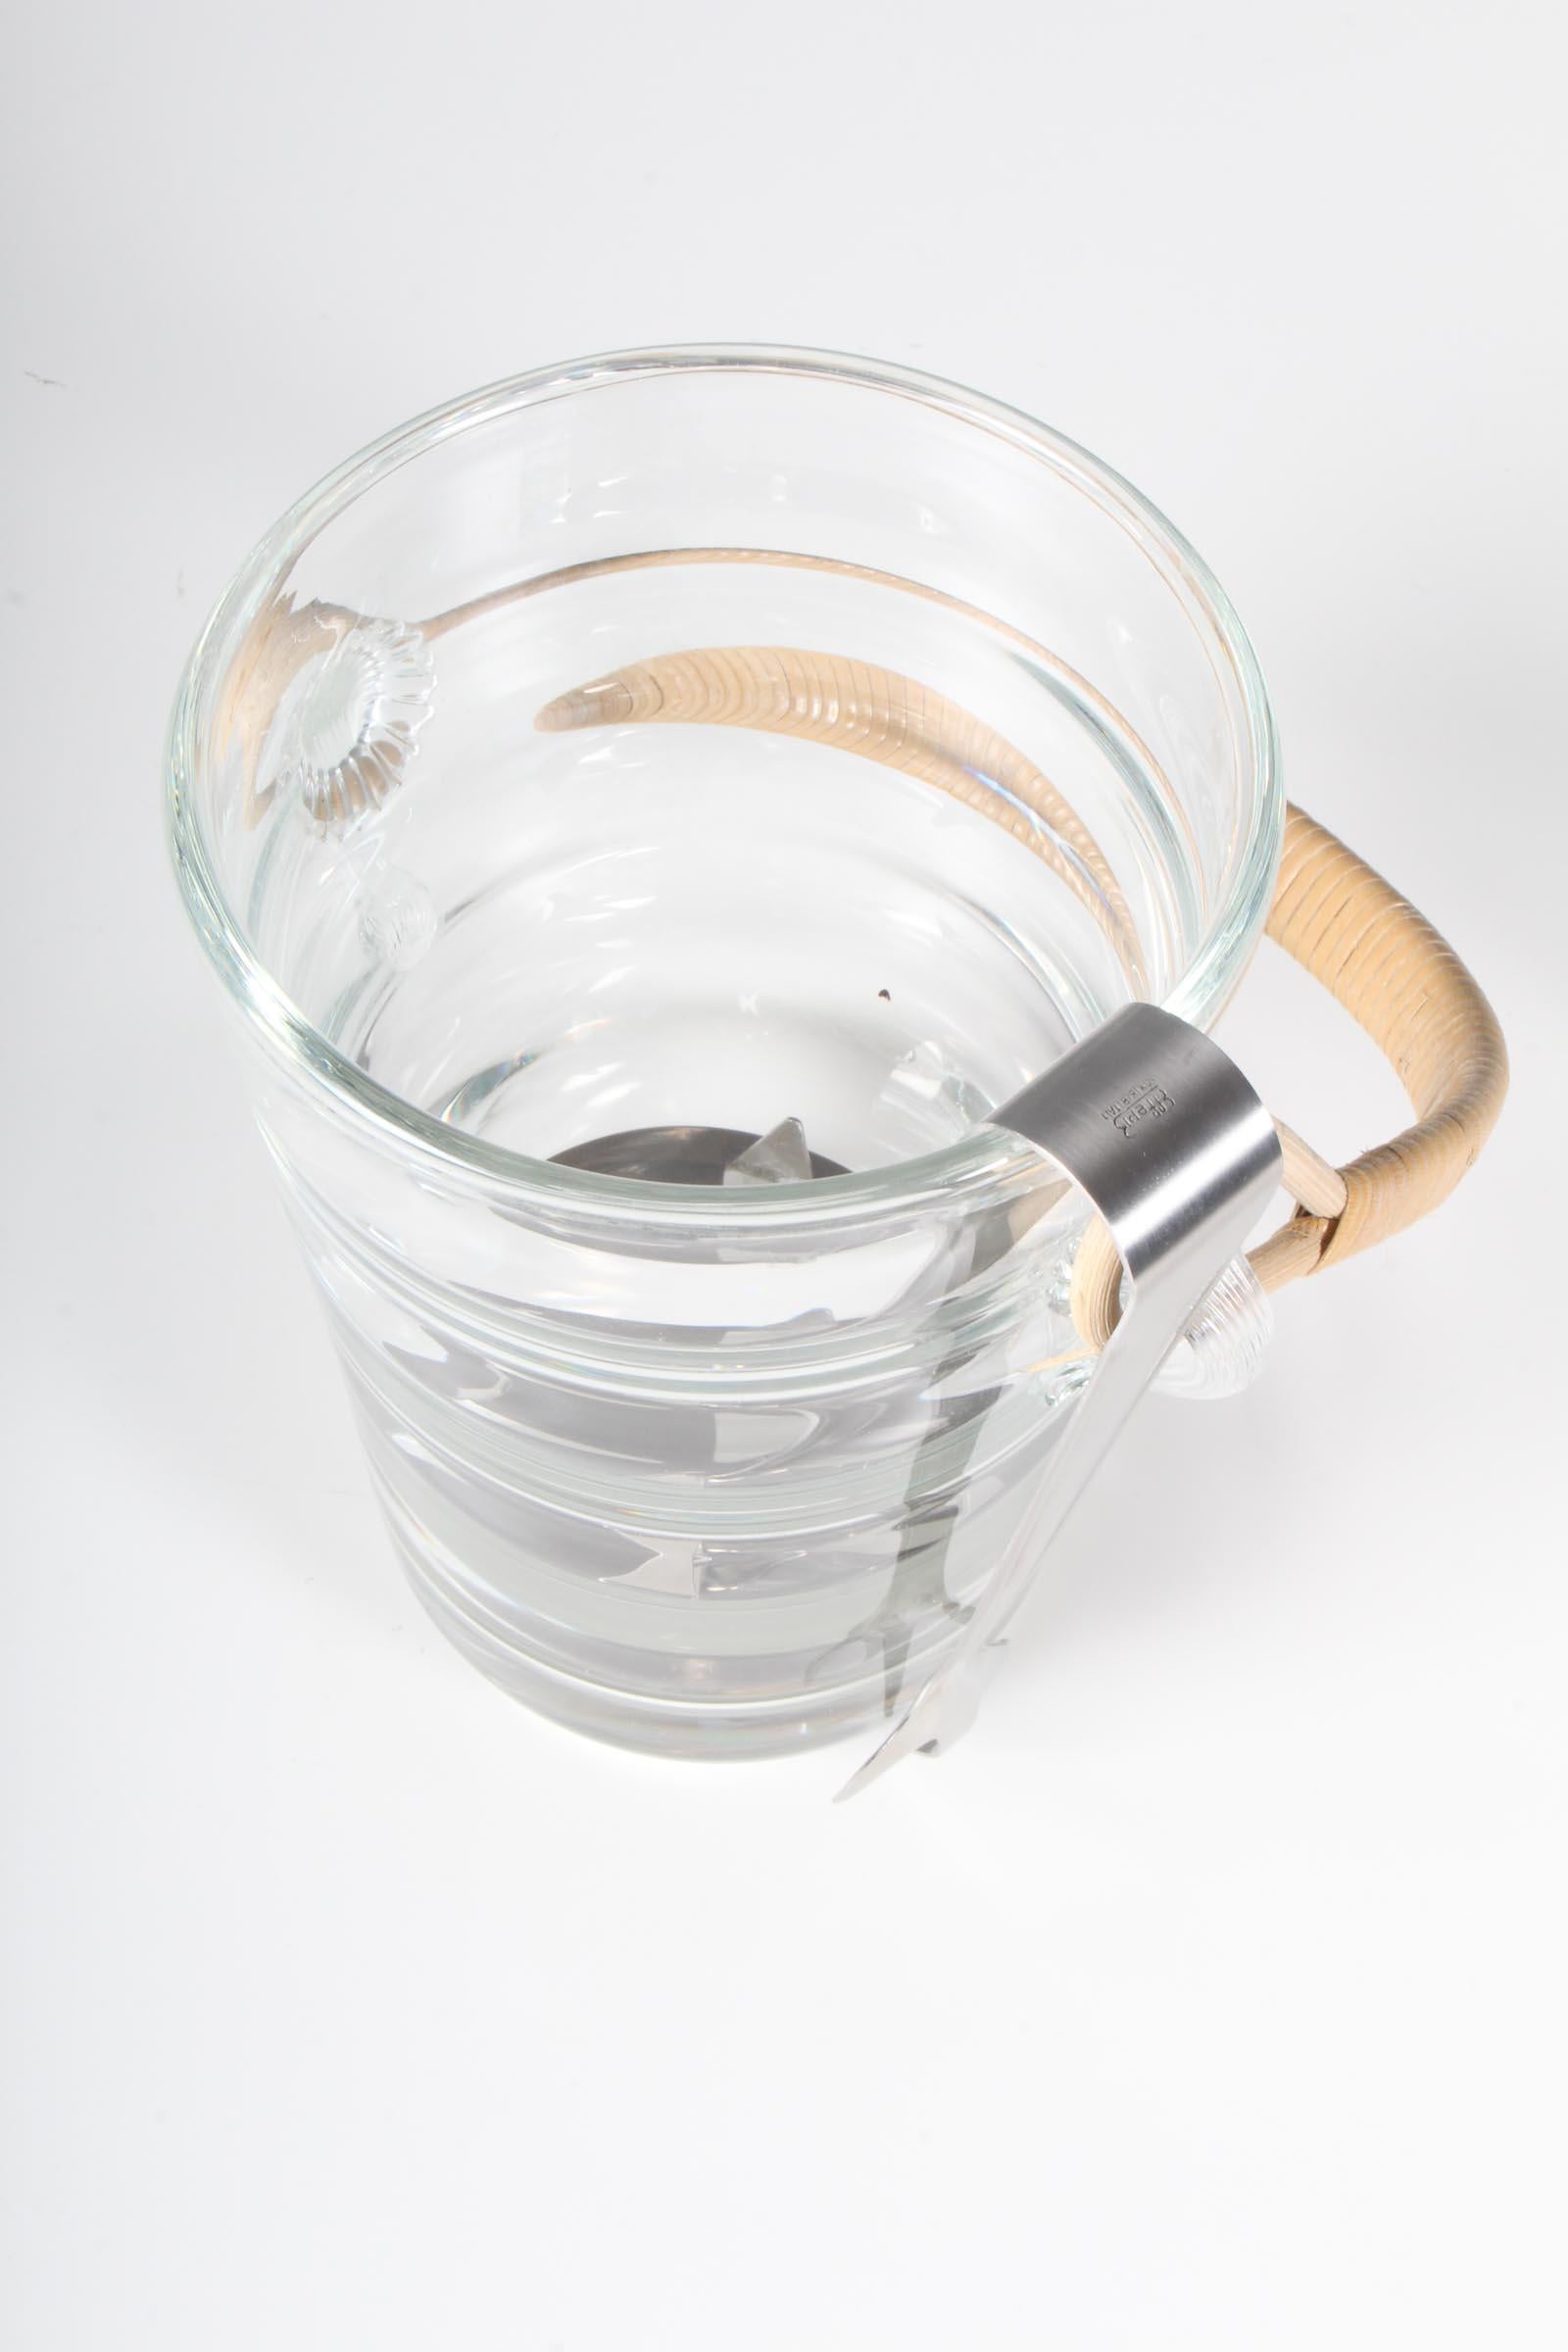 Holmegaard ice bucket in glass with cane handle.

Made by Holmegaard in the 1960s.